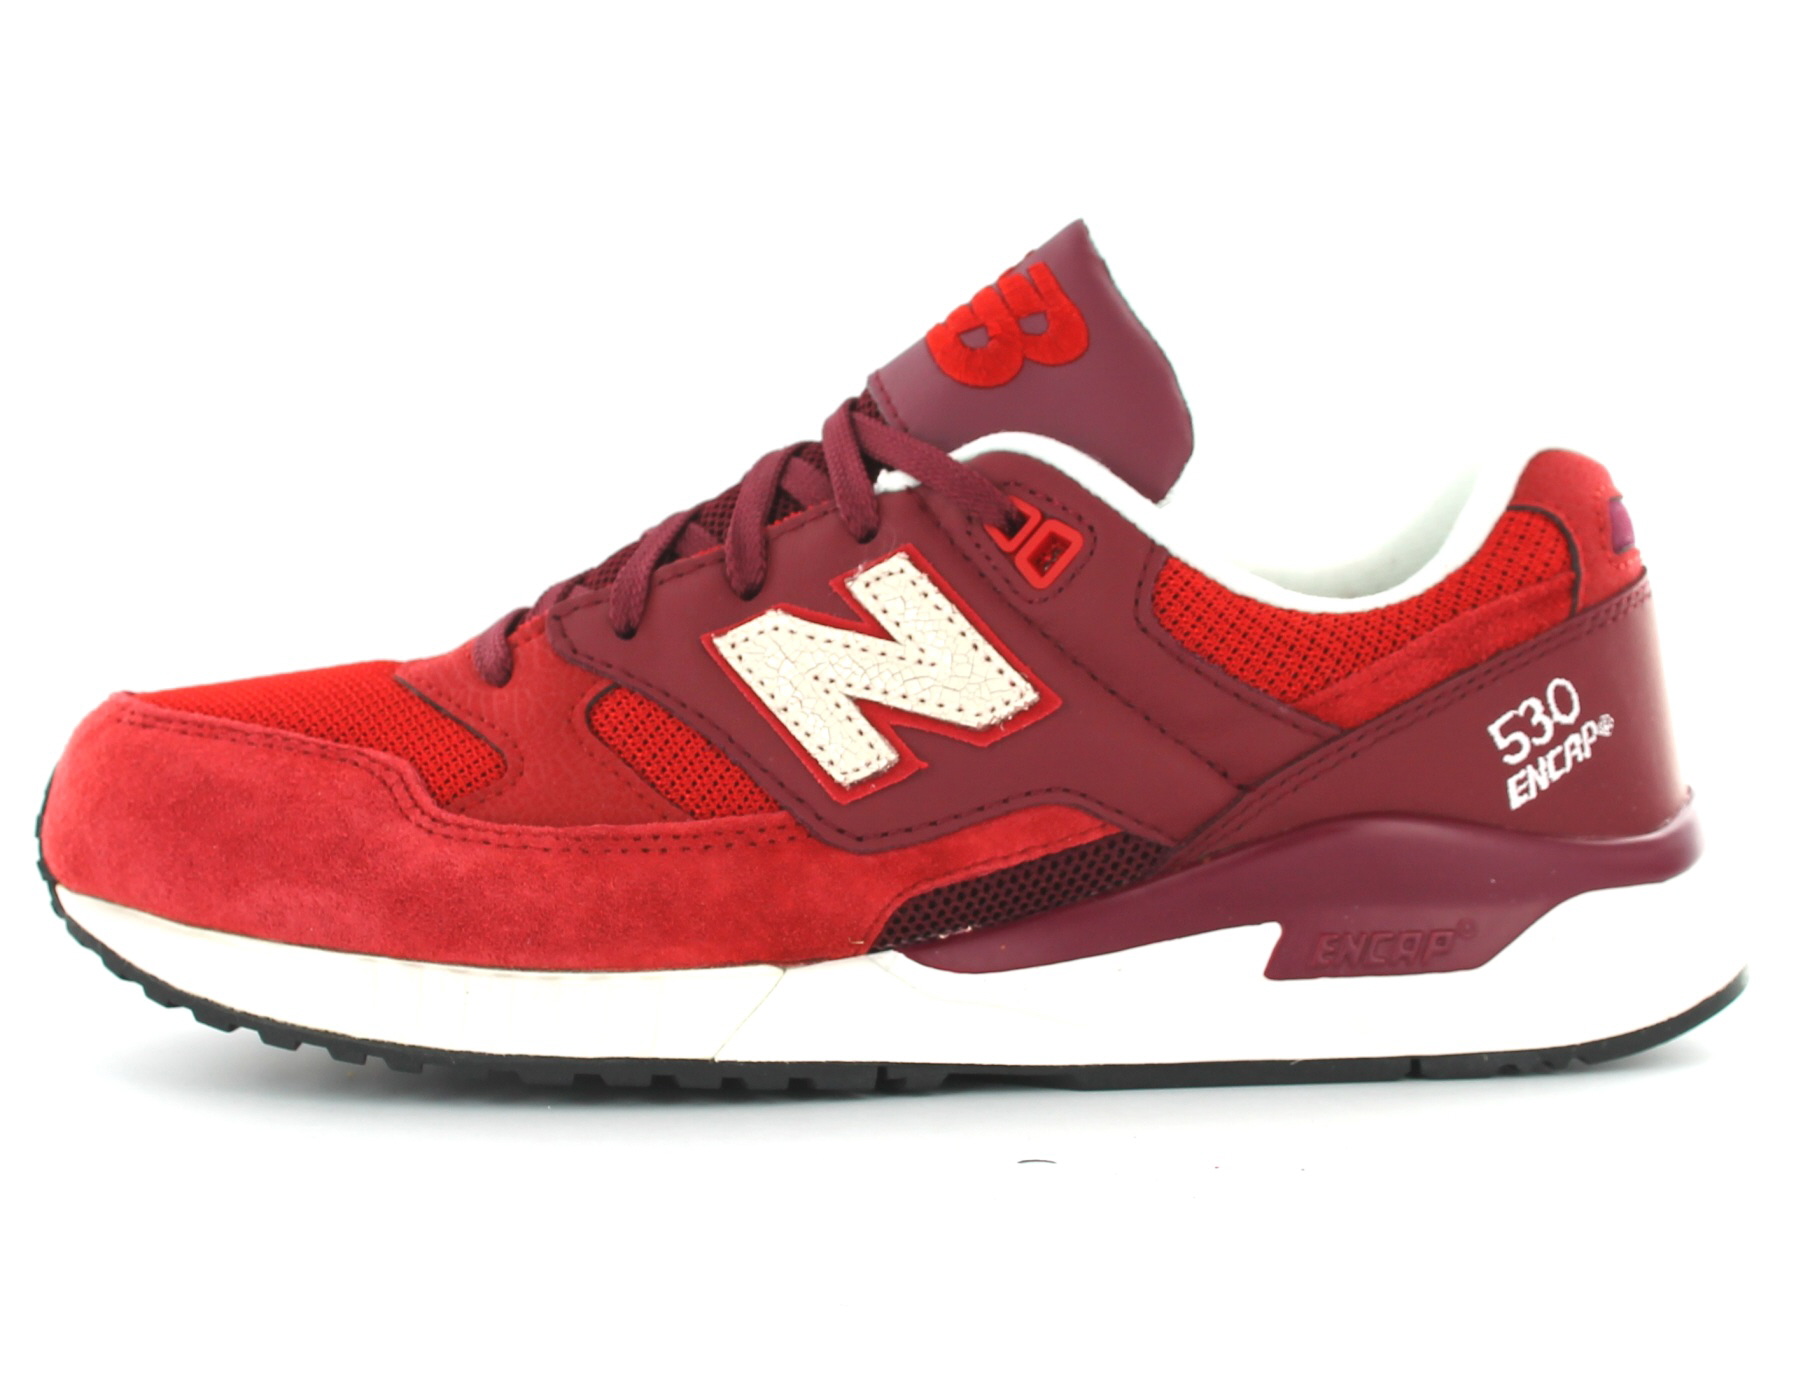 new balance 530 homme 2015 cheap buy online